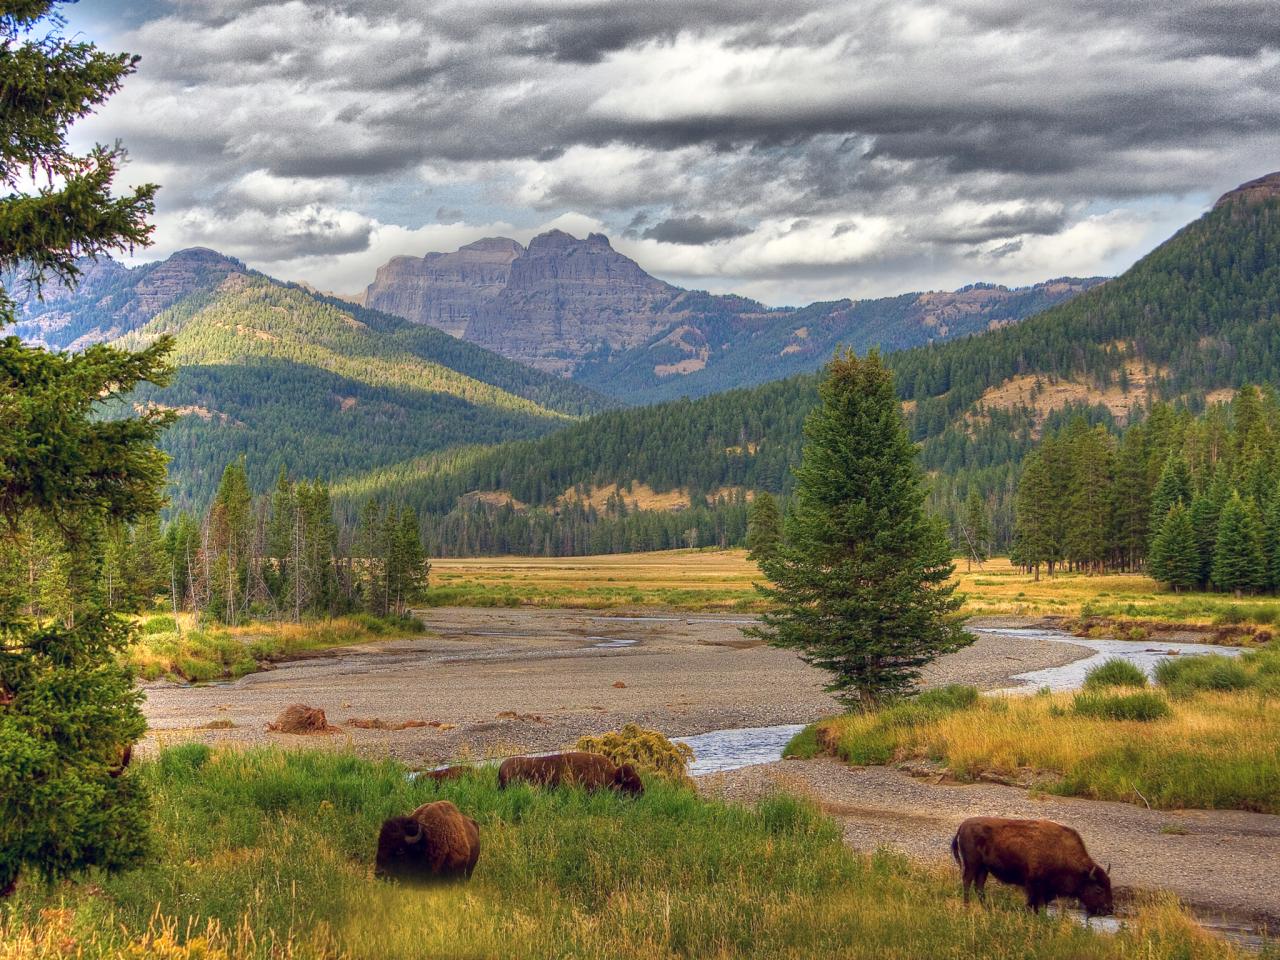 The Natural Beauty Of The Yellowstone National Park